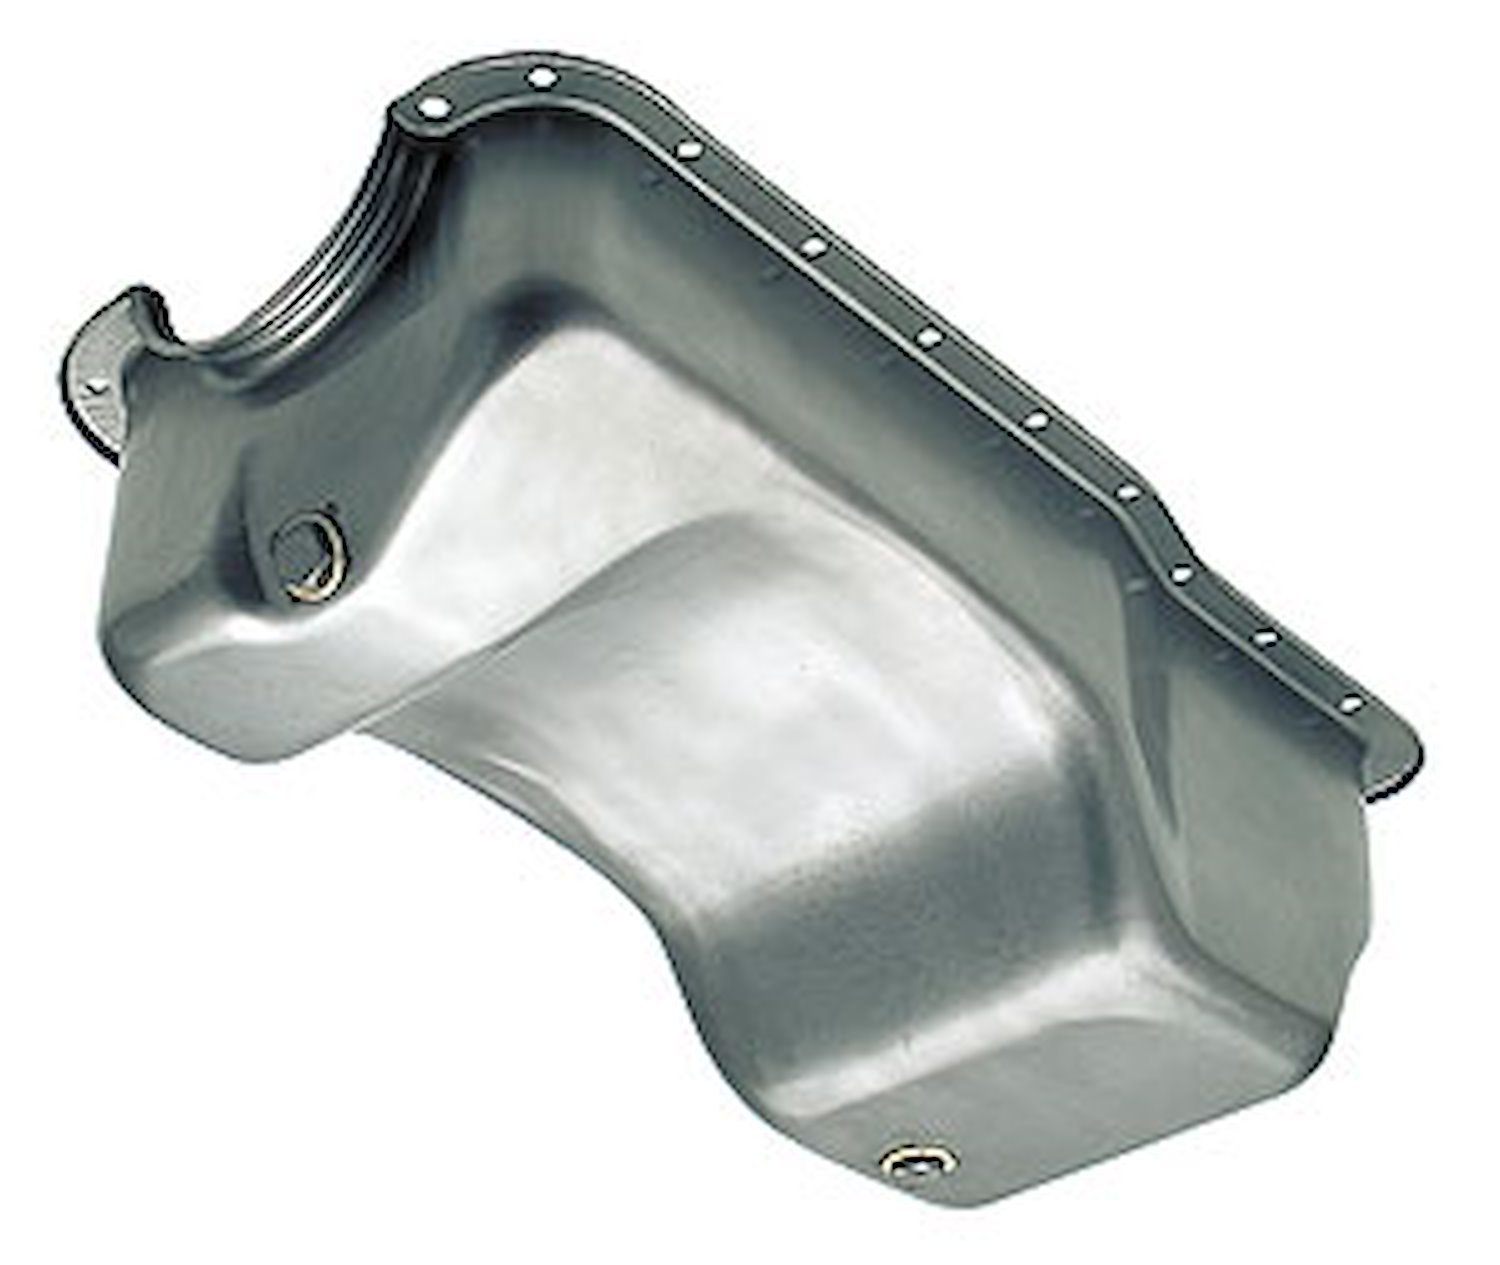 Unplated (Raw) Oil Pan 1983-90 Mustang 302 5.0L